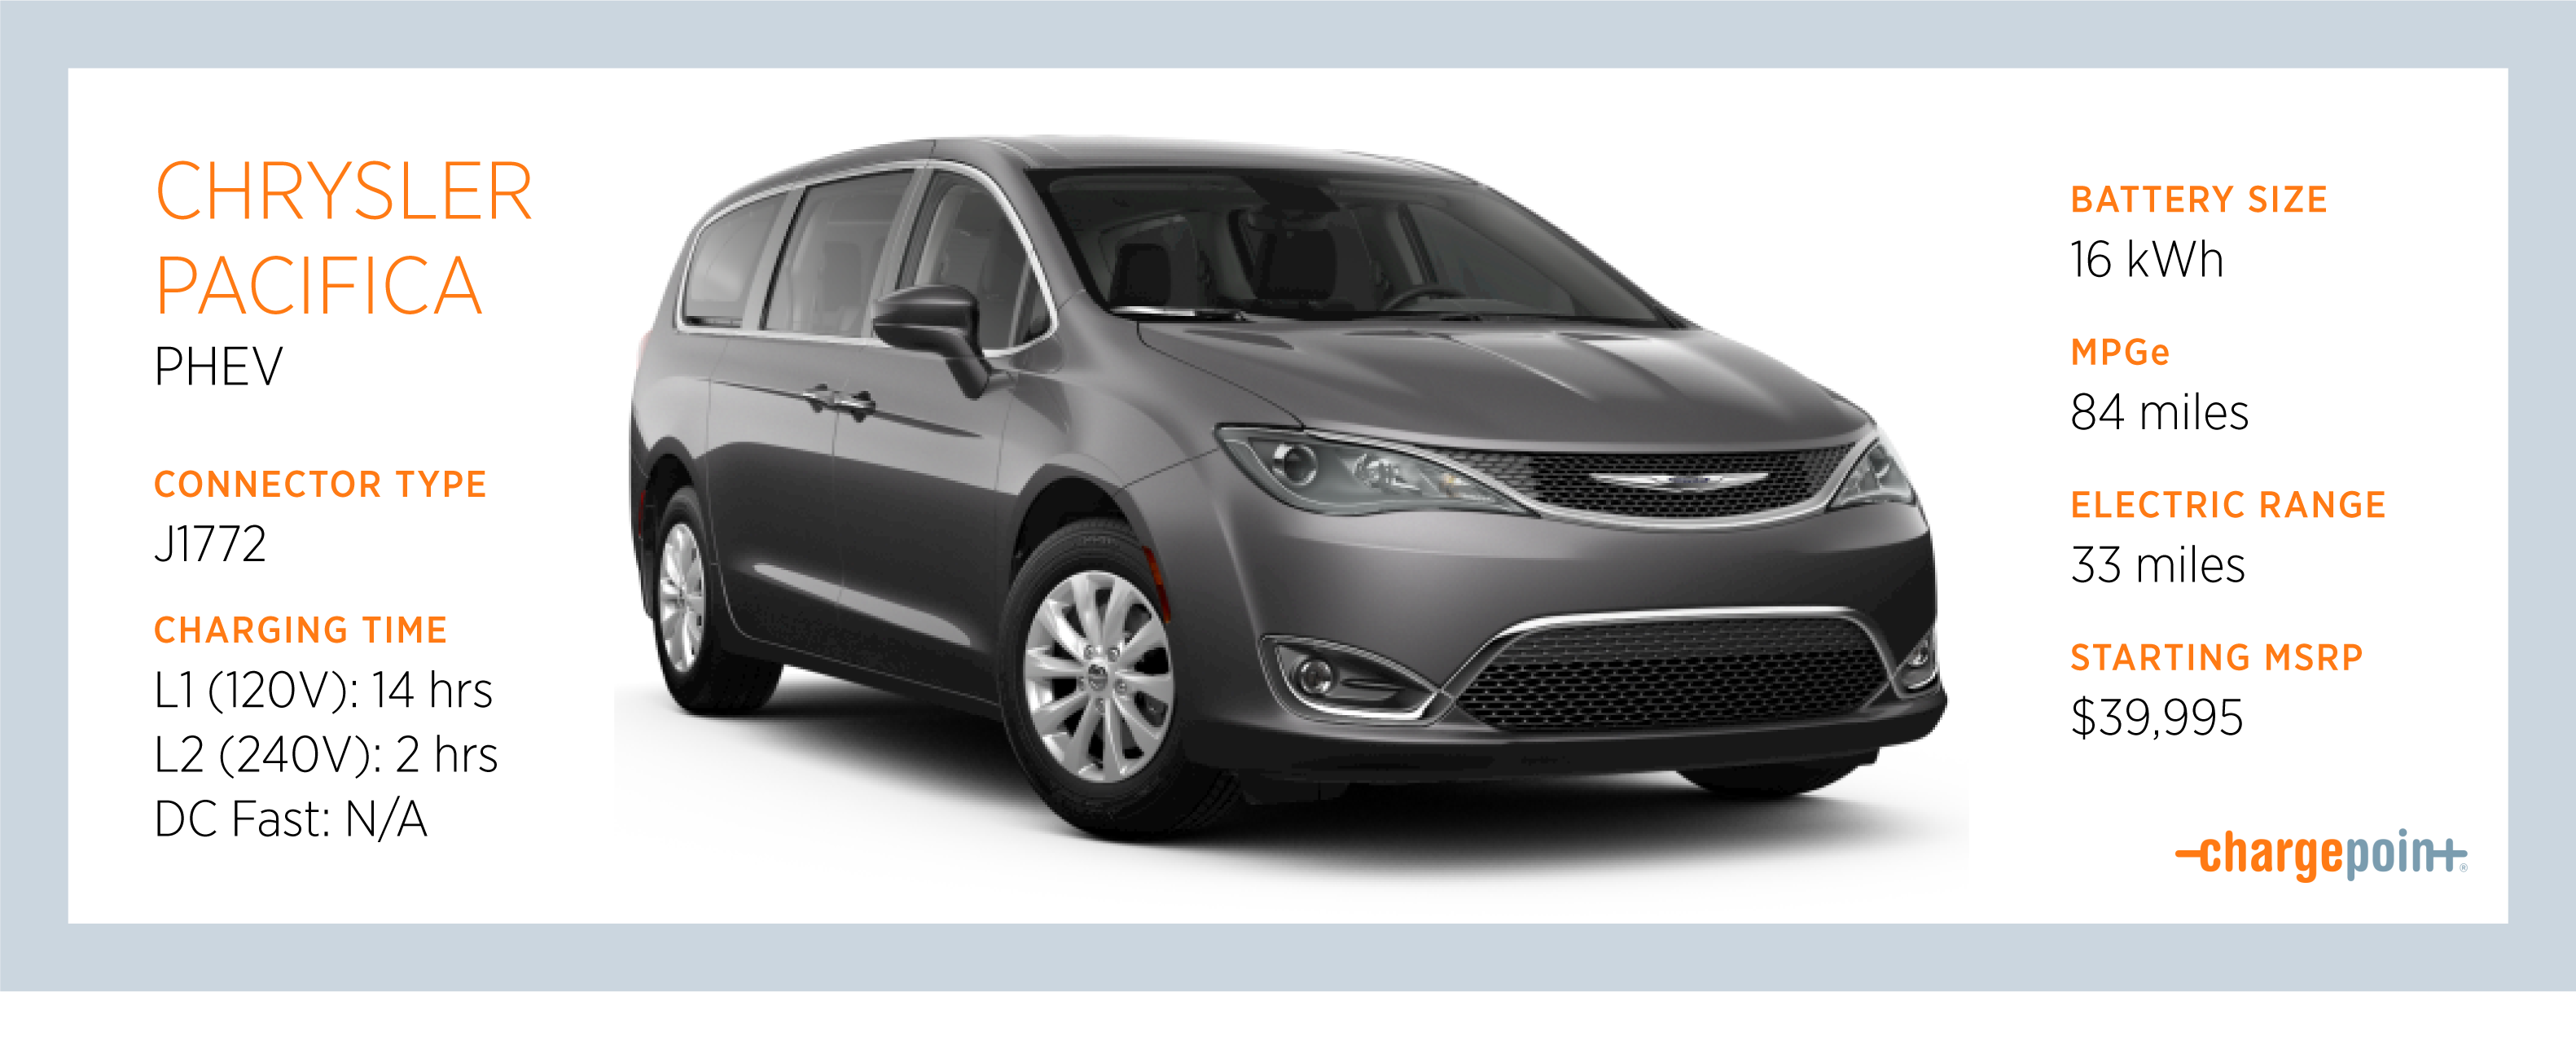 How to Charge the Chrysler Pacifica Hybrid Minivan